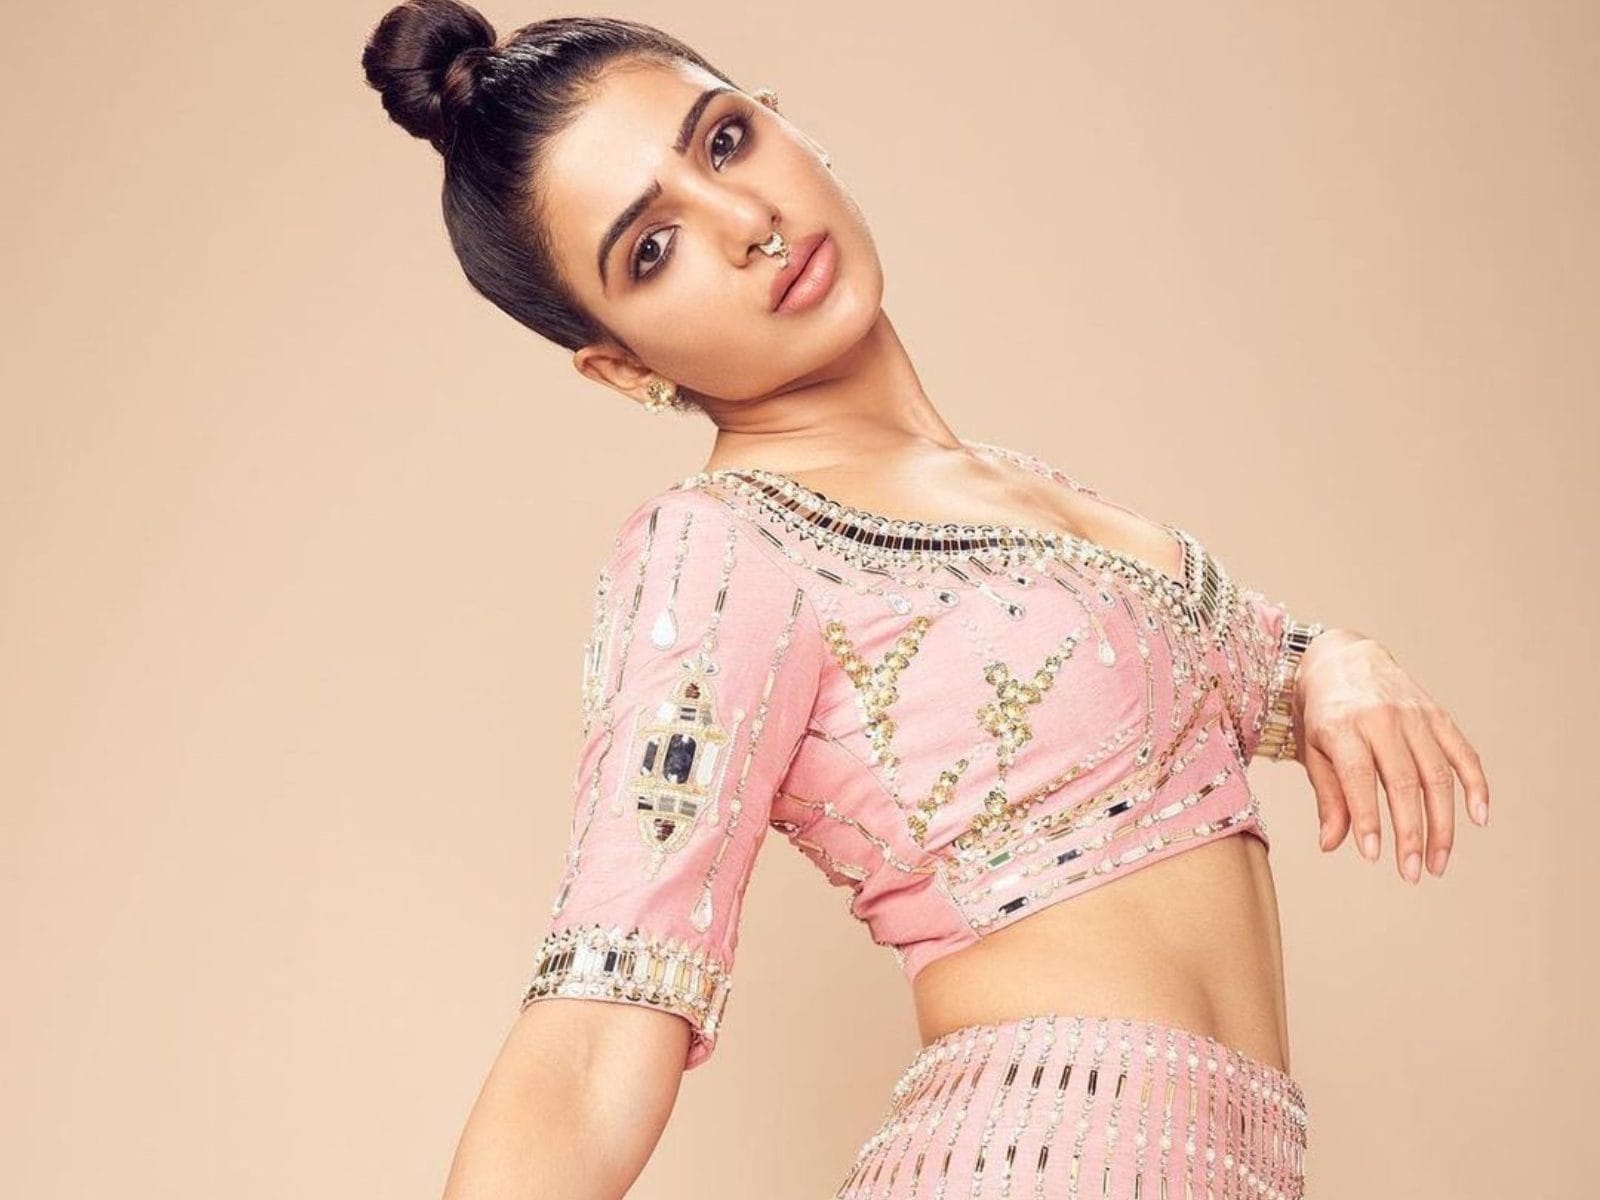 Samantha Akkineni Says 'Oh So You Do See Instagram' After Hubby